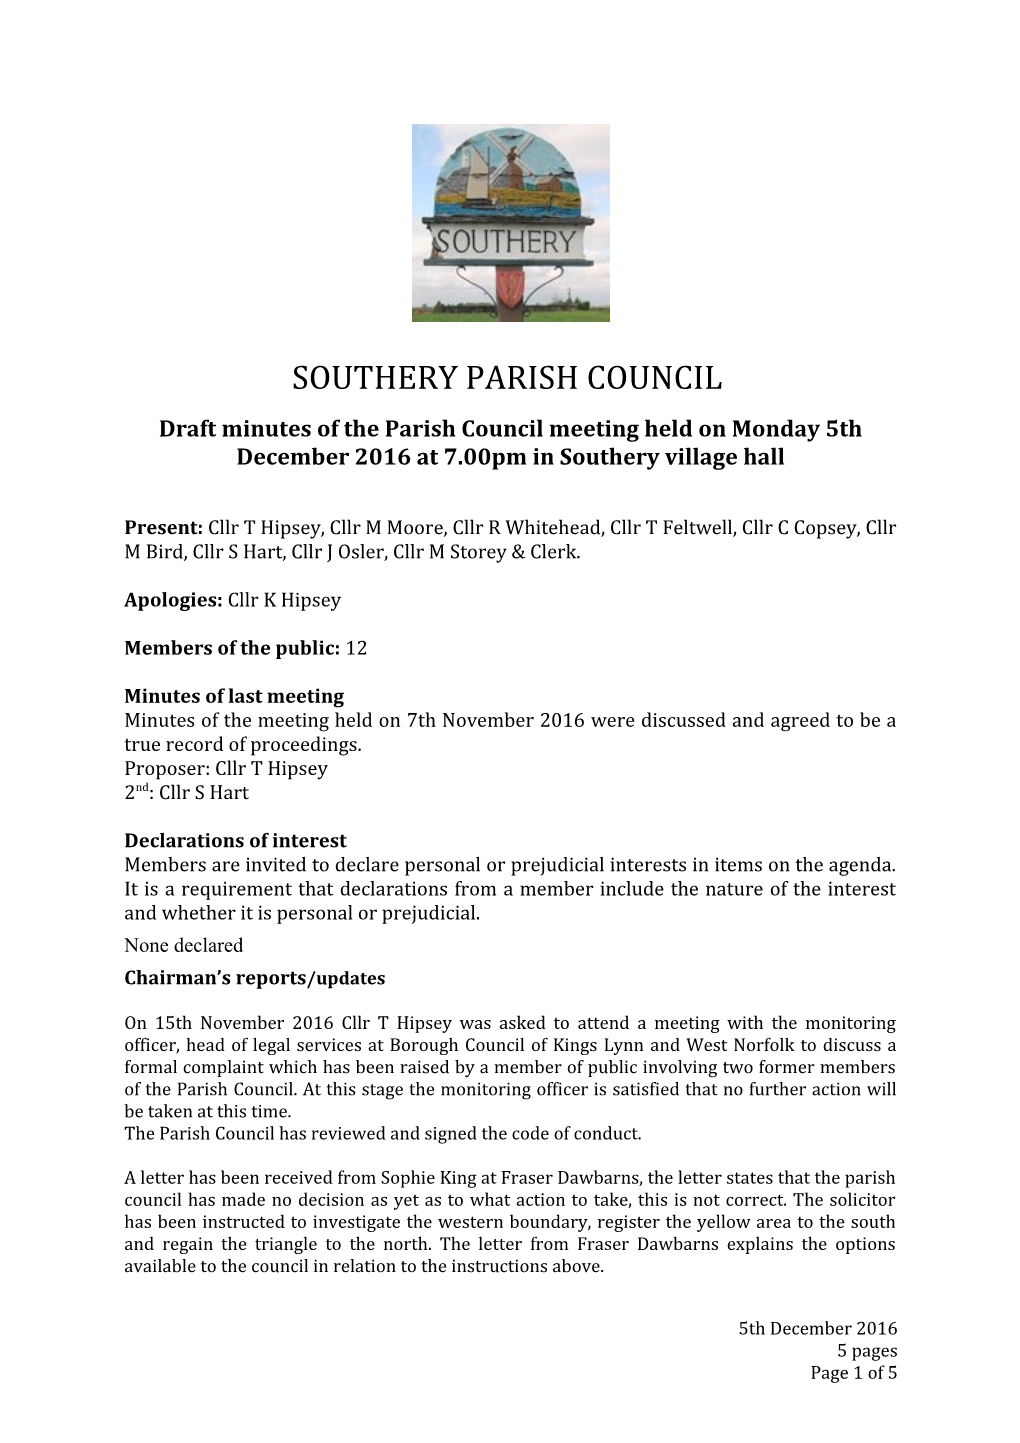 Draft Minutes of Theparish Council Meetingheld on Monday 5Th December 2016 At7.00Pm In